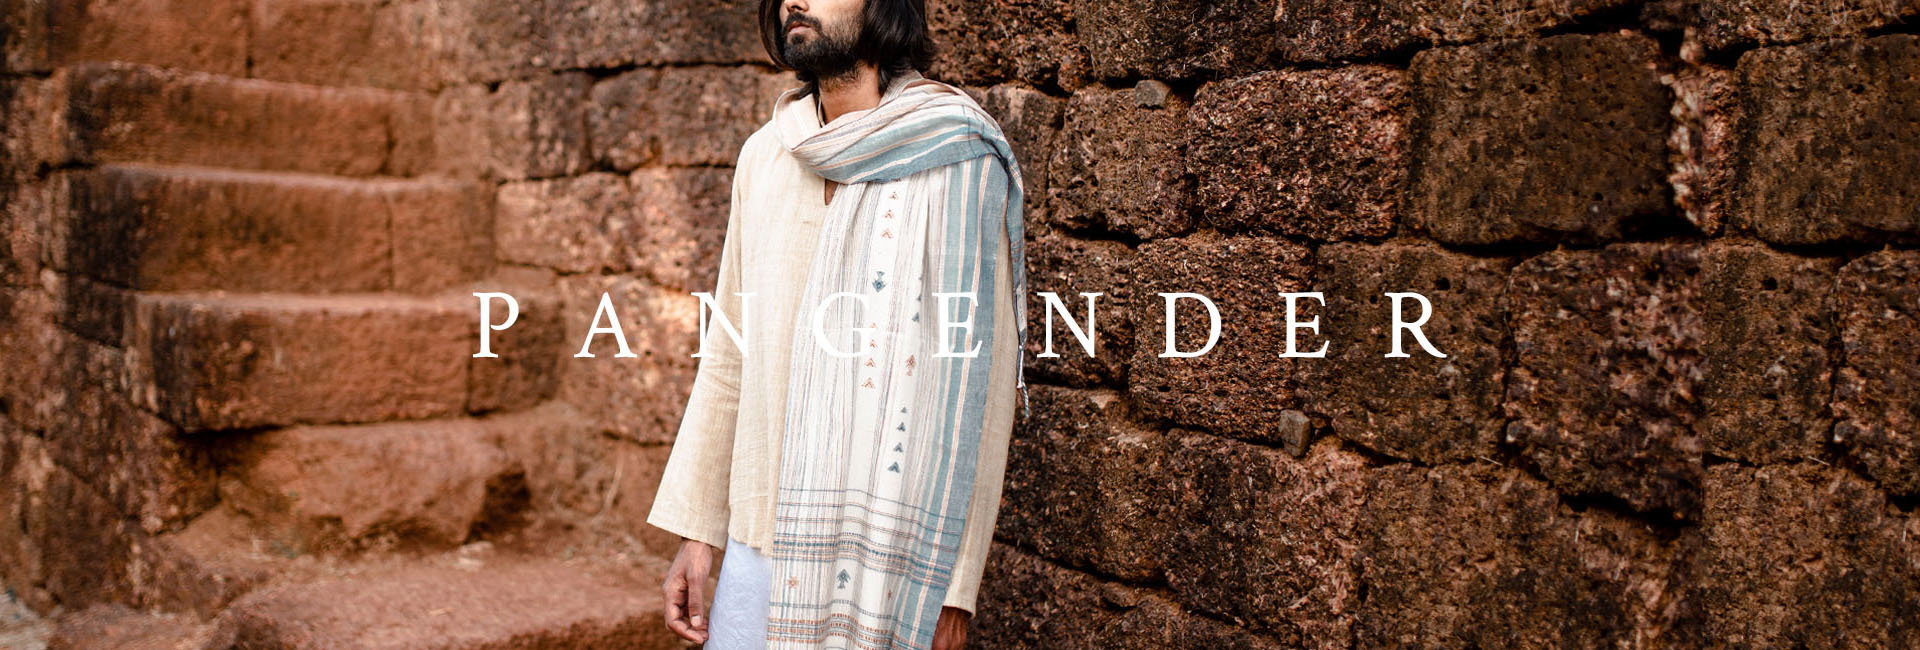 Pangender clothing, pangender cootn clothing, unisex clothing, Sepia stories, Handmade products online, 100% Natural fashion accessories online, Best organic online store, Organic products India, Organic brands online, Natural handmade products, Fashion accessories online, Online store, Praful Makhwana, Mister and Mister, Socially conscious brand, Indian handmade products, Indian designer brand, Indian accessories, Women Dresses online, shop organic handmade dresses, handmade dresses for women, shop women dresses online, designer dresses, Indian handmade dresses, fashionable dresses, Women dresses, organic dresses, dresses for women, designer women dresses, handmade women dresses, organic handmade clothing, handmade organic clothing, natural fabrics, handcrafted clothing in India, organic fabrics, eco-friendly clothing brands, organic clothing range, sustainable clothing